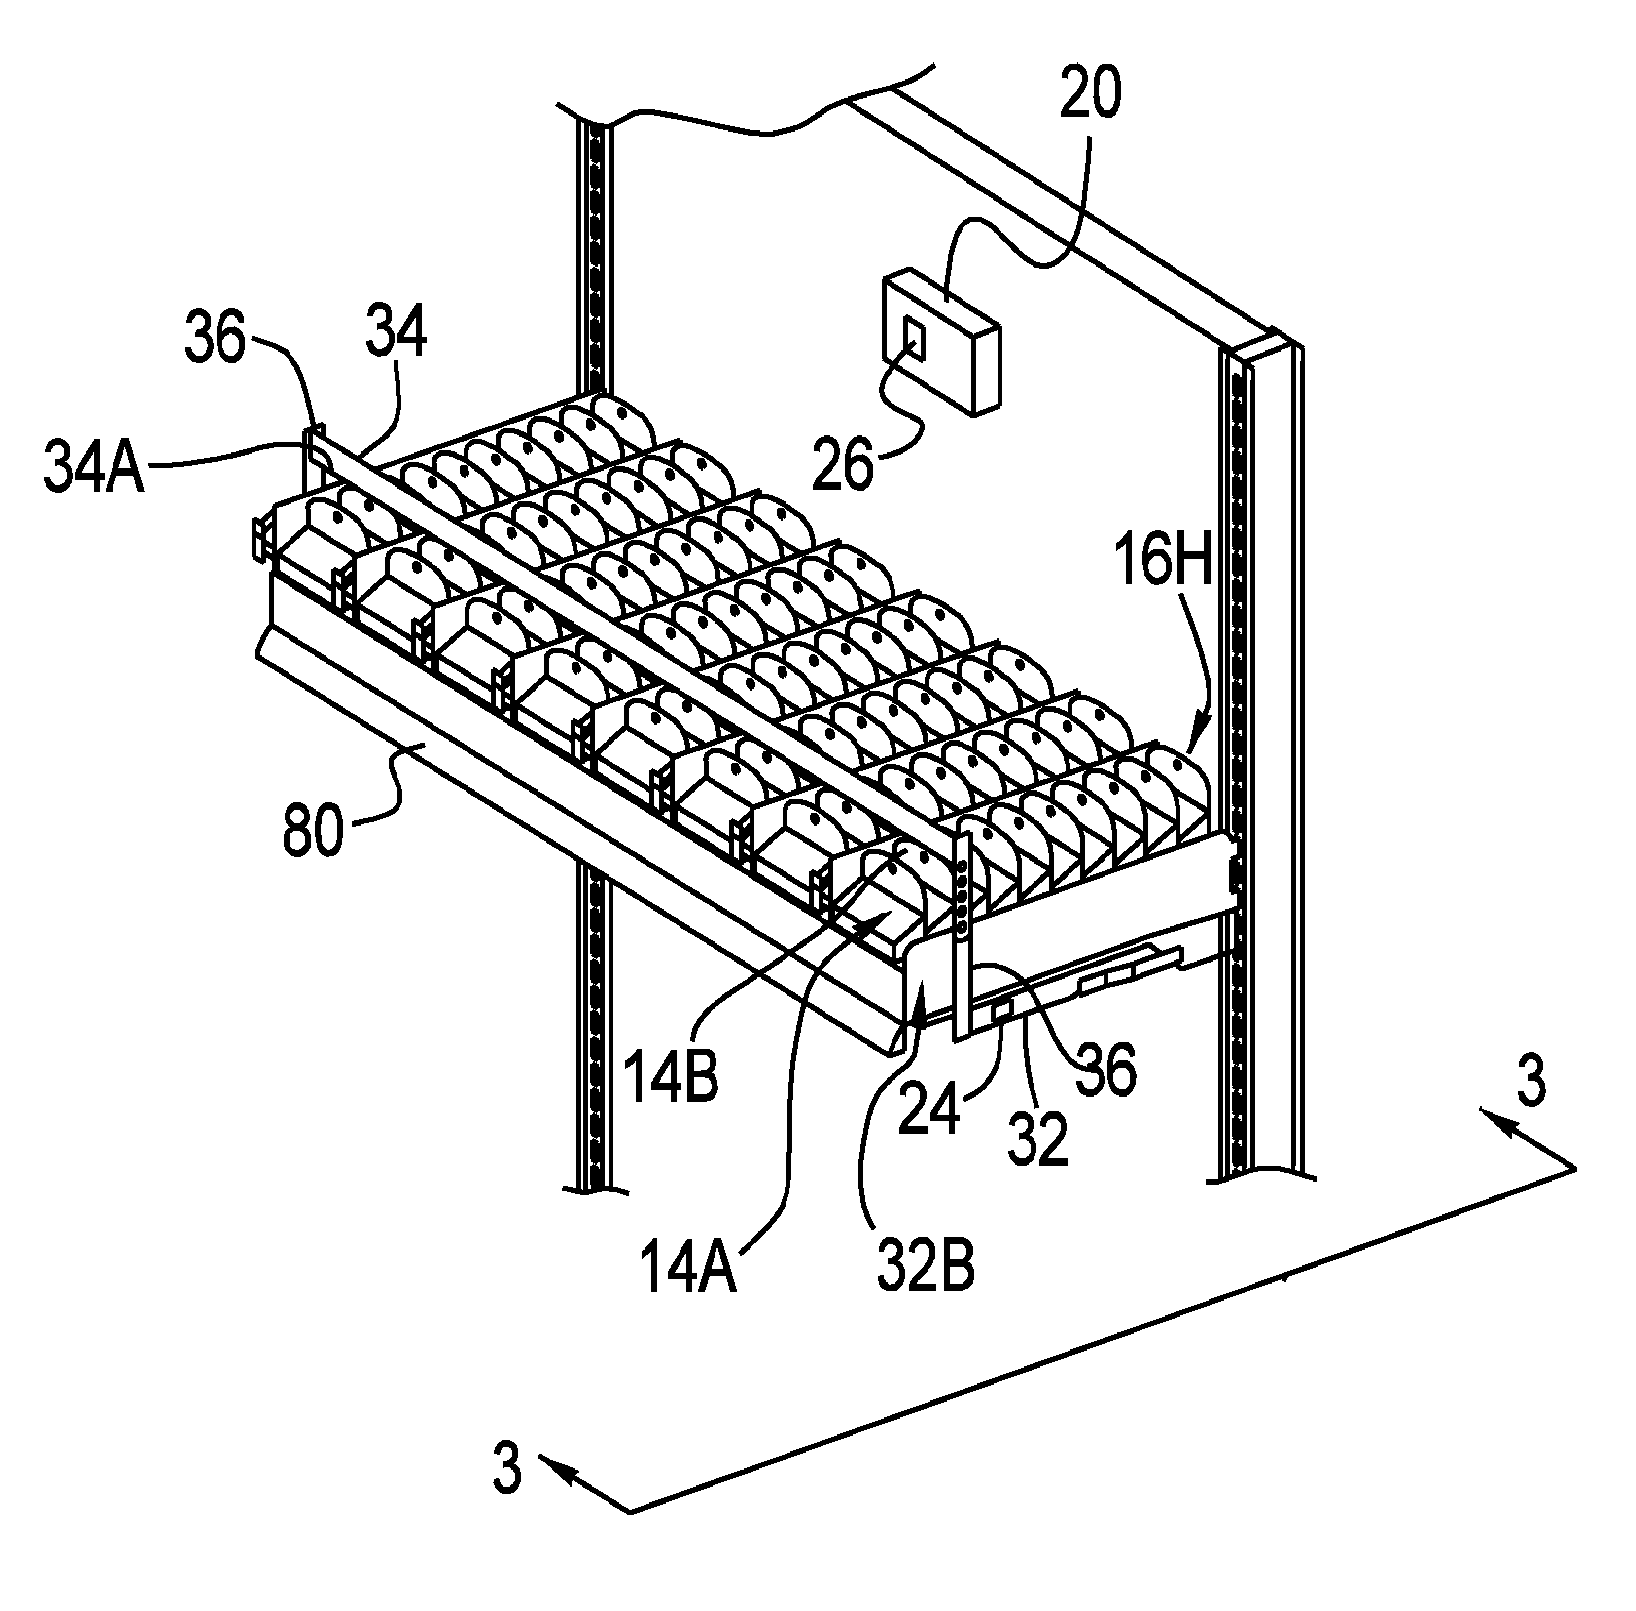 Theft deterrent system for product display device